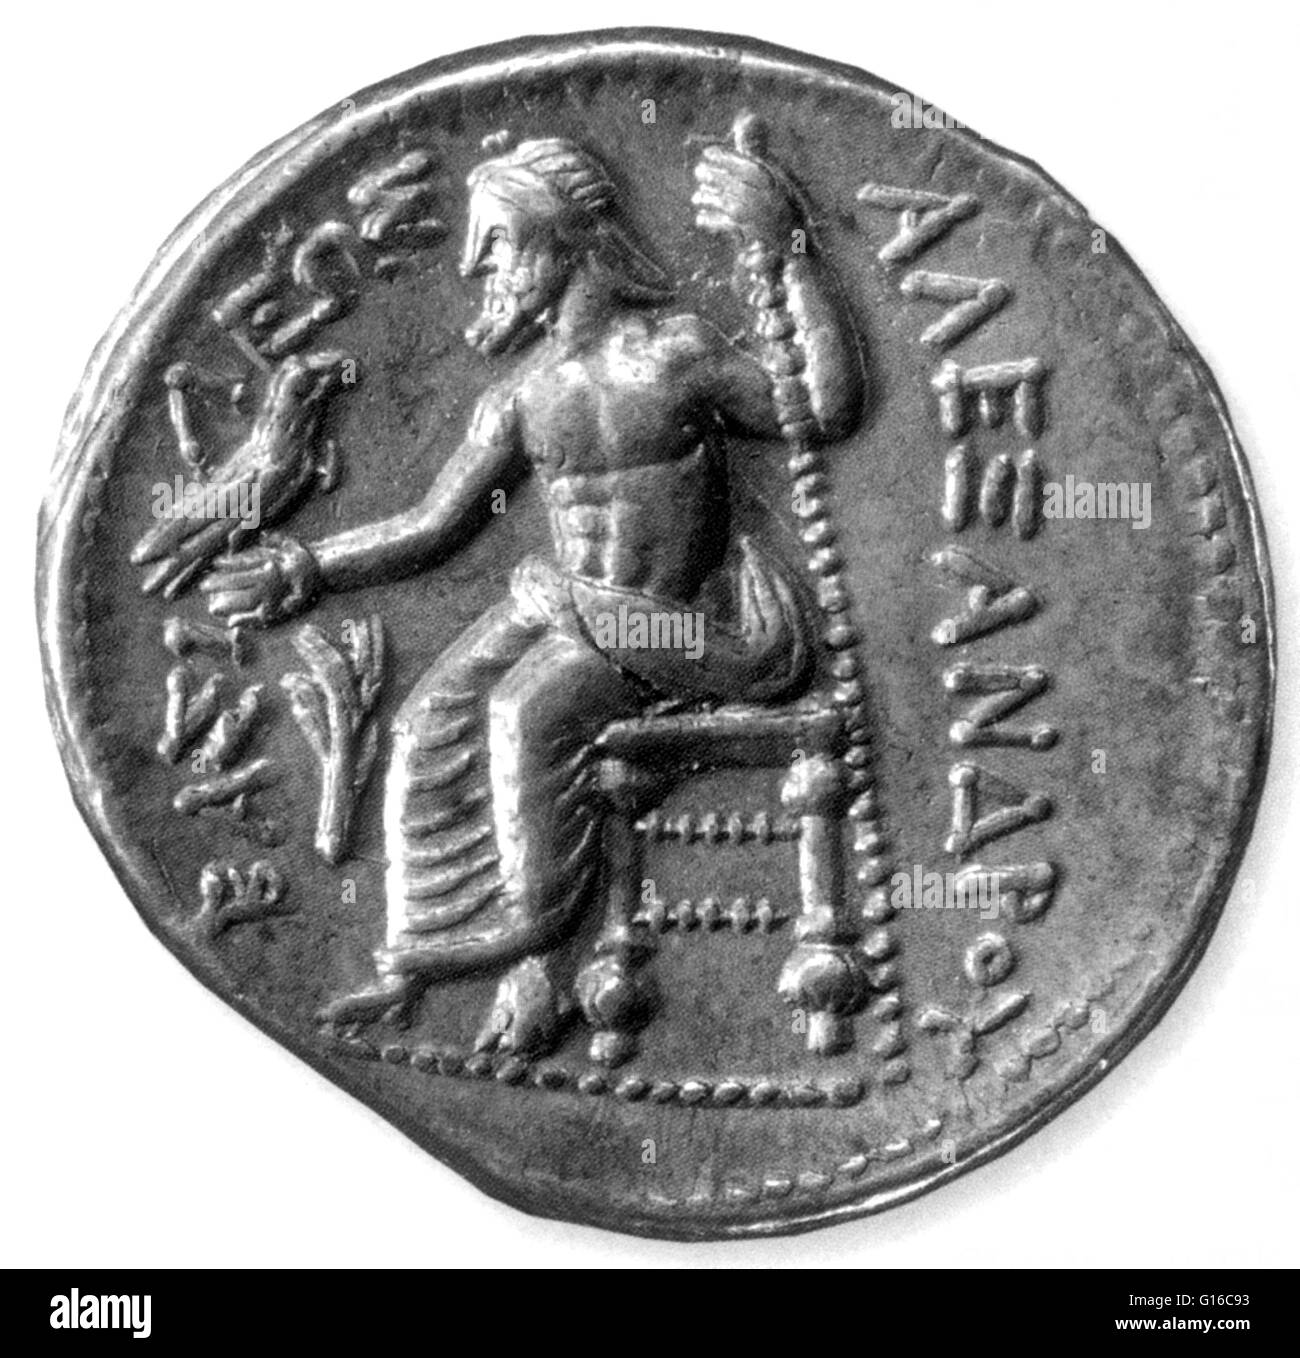 Reverse of a silver tetradrachm minted in Amphipolis during the reign of Alexander the Great. Zeus seating left on a throne, holding an eagle and a scepter. The tetradrachm was an Ancient Greek silver coin equivalent to four drachmae and it was in wide ci Stock Photo